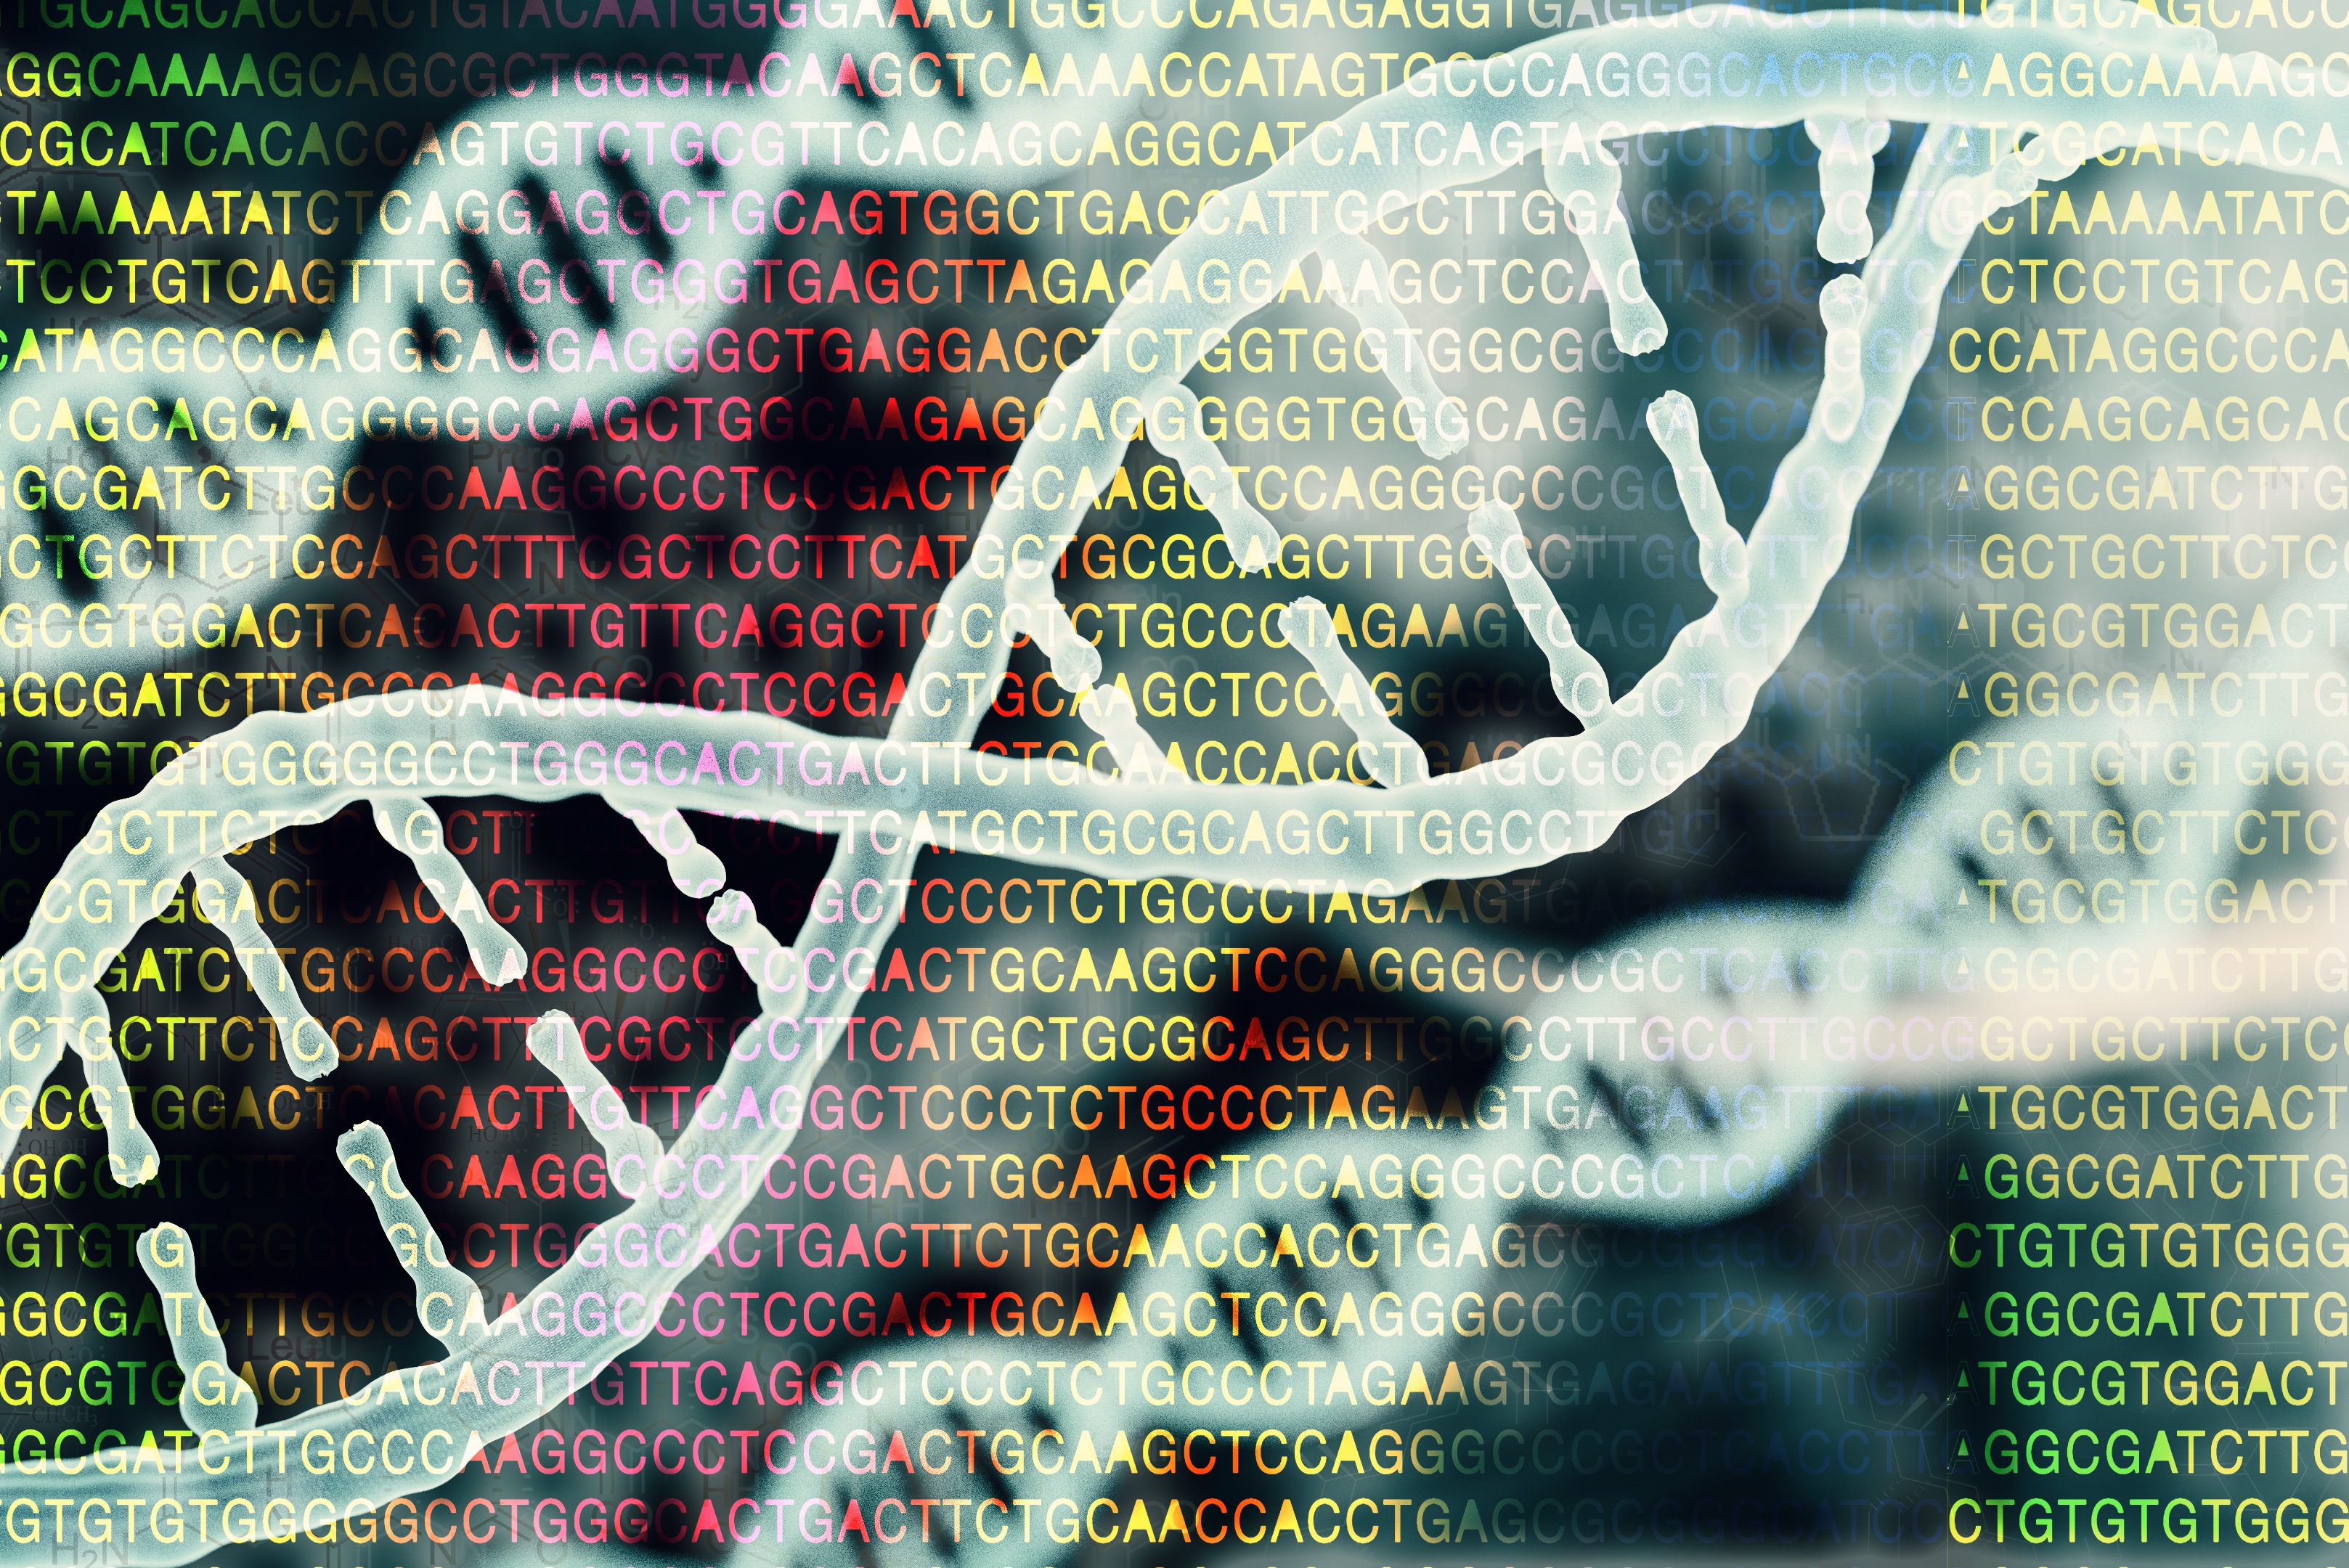 Biotechnology/bioinformatics concept showing DNA and protein letter background. (Getty Images)